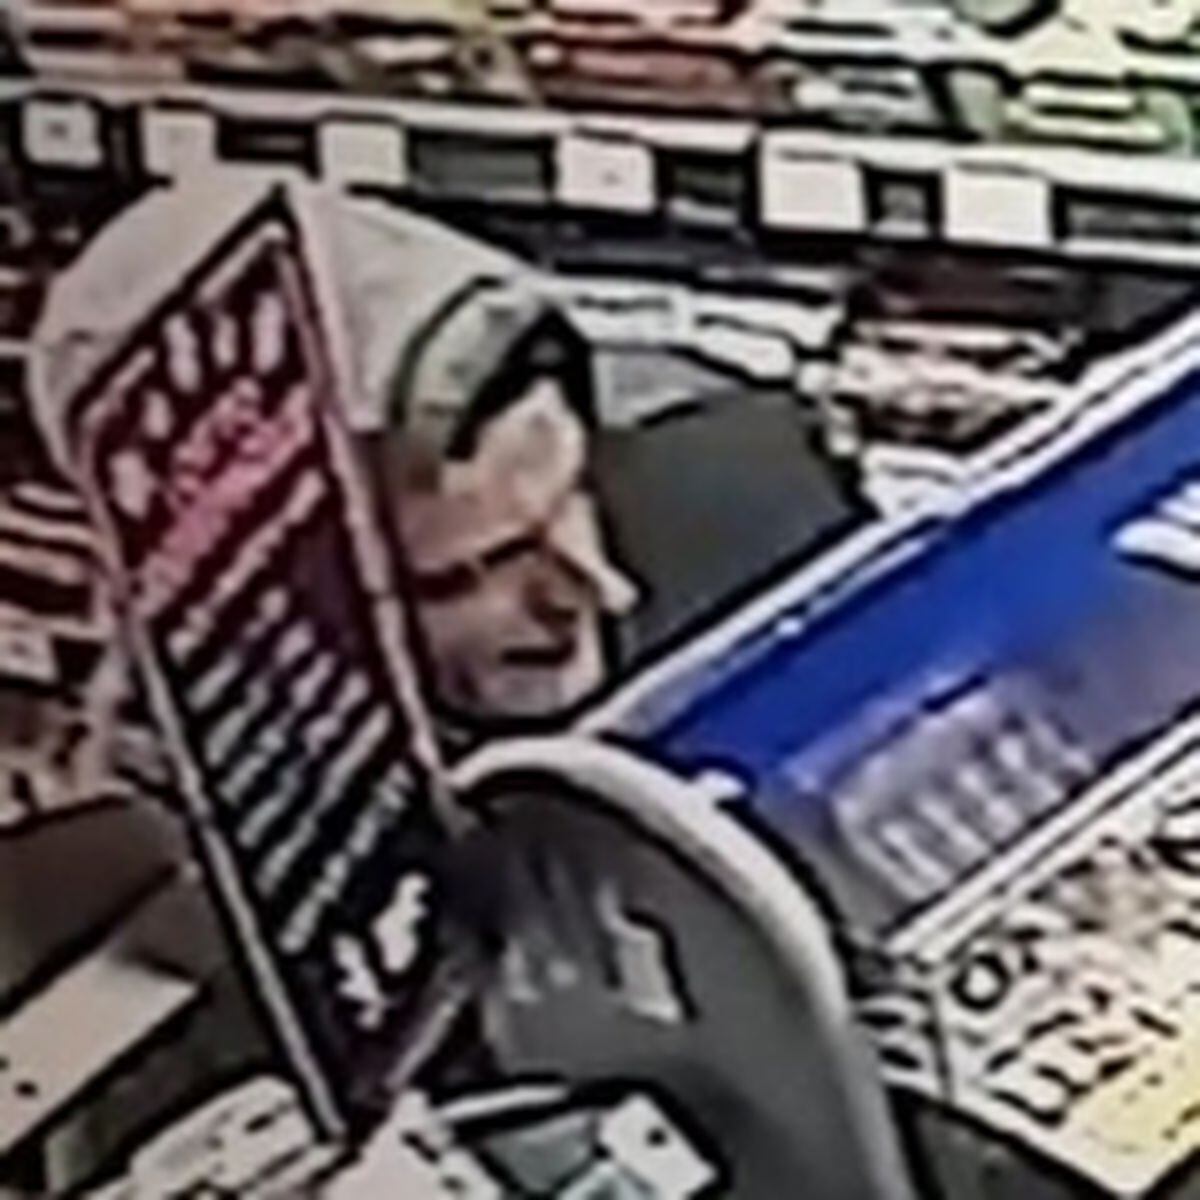 The CCTV image released by police